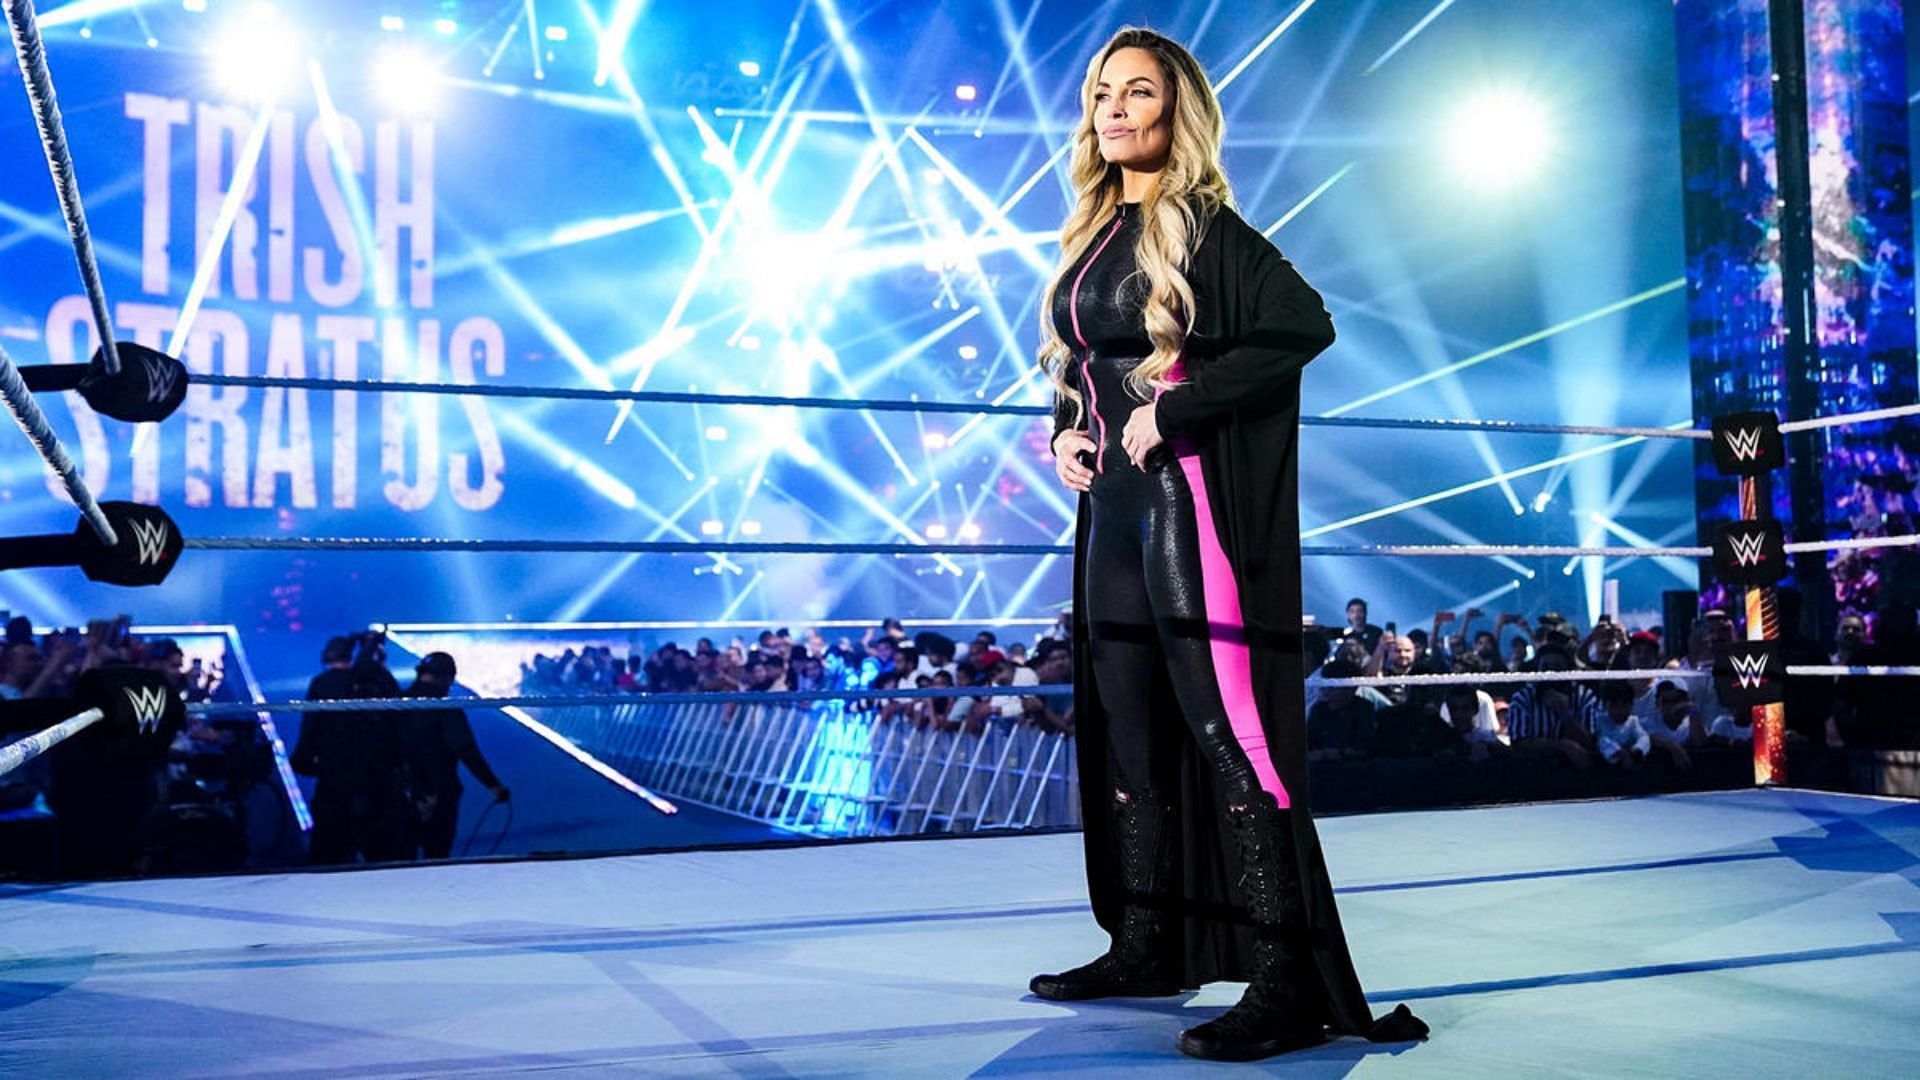 Trish Stratus during her entrance. Image Credits: wwe.com